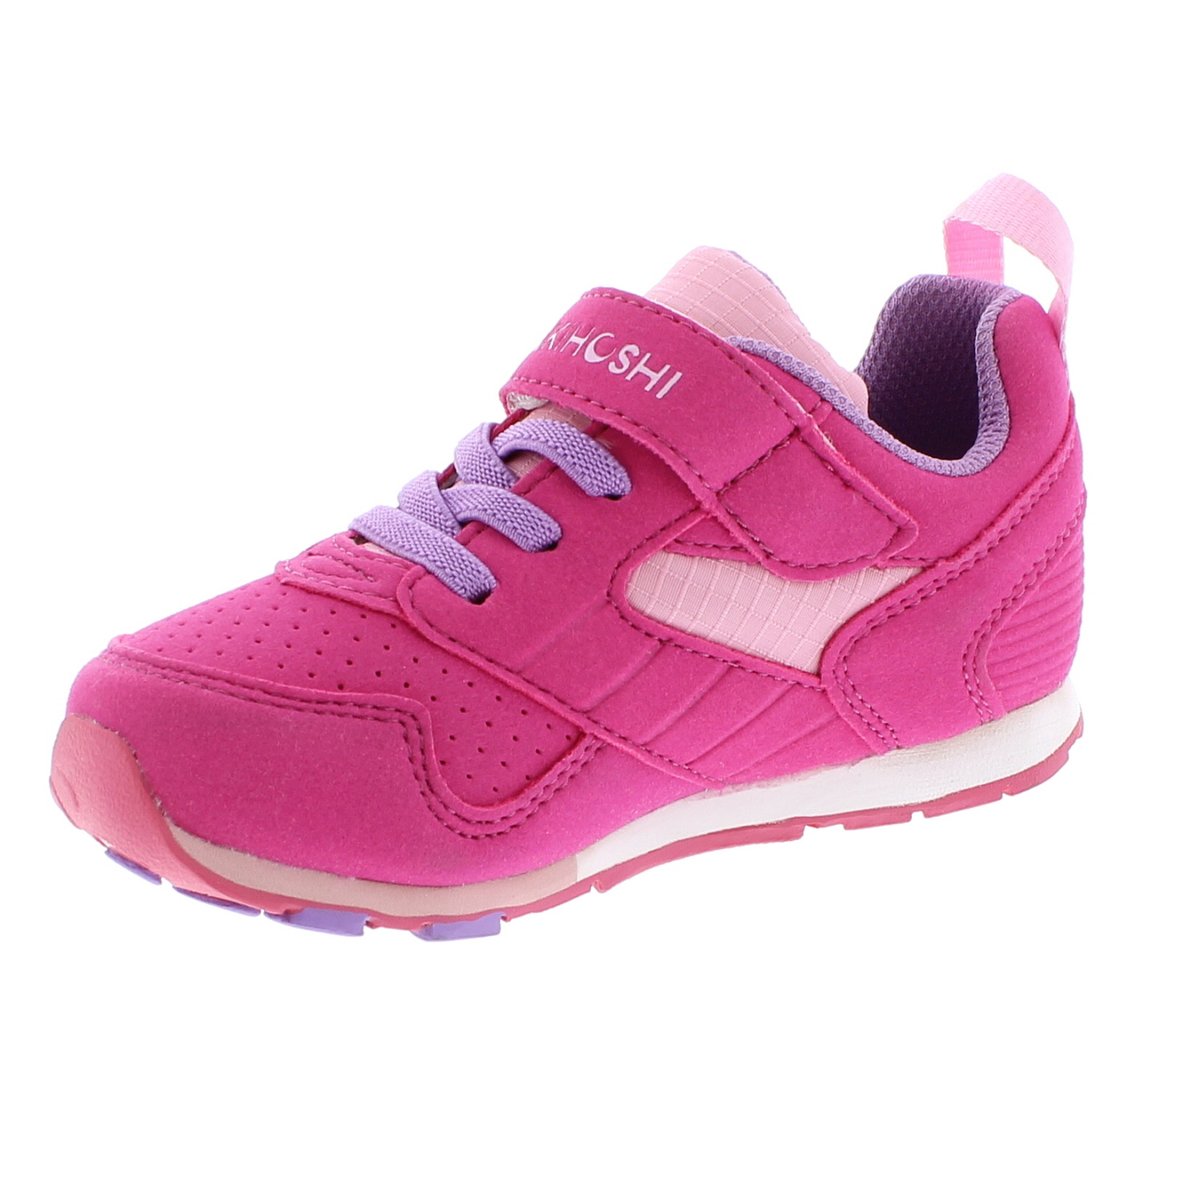 Child Tsukihoshi Racer Sneaker in Fuchsia/Pink from the front view